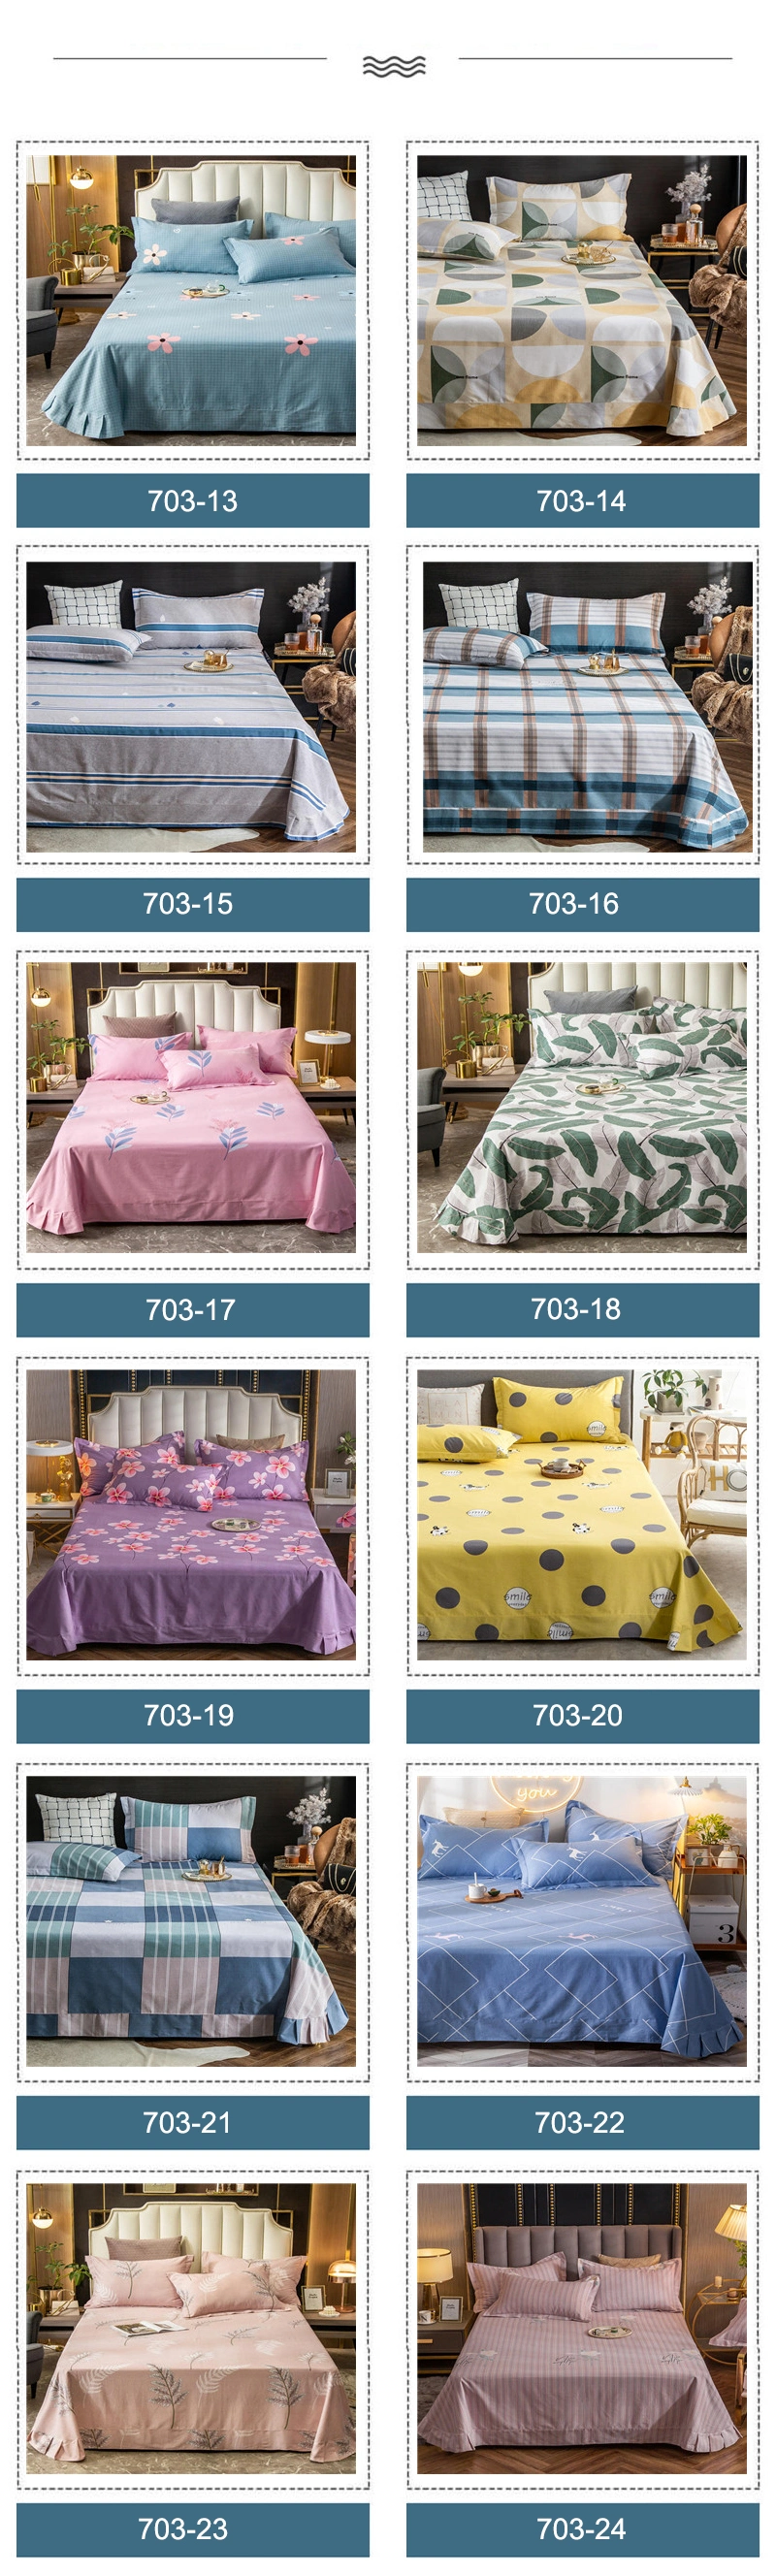 Luxury Sheet Set High Quality Soft Comfortable for California King Size Bedding Set